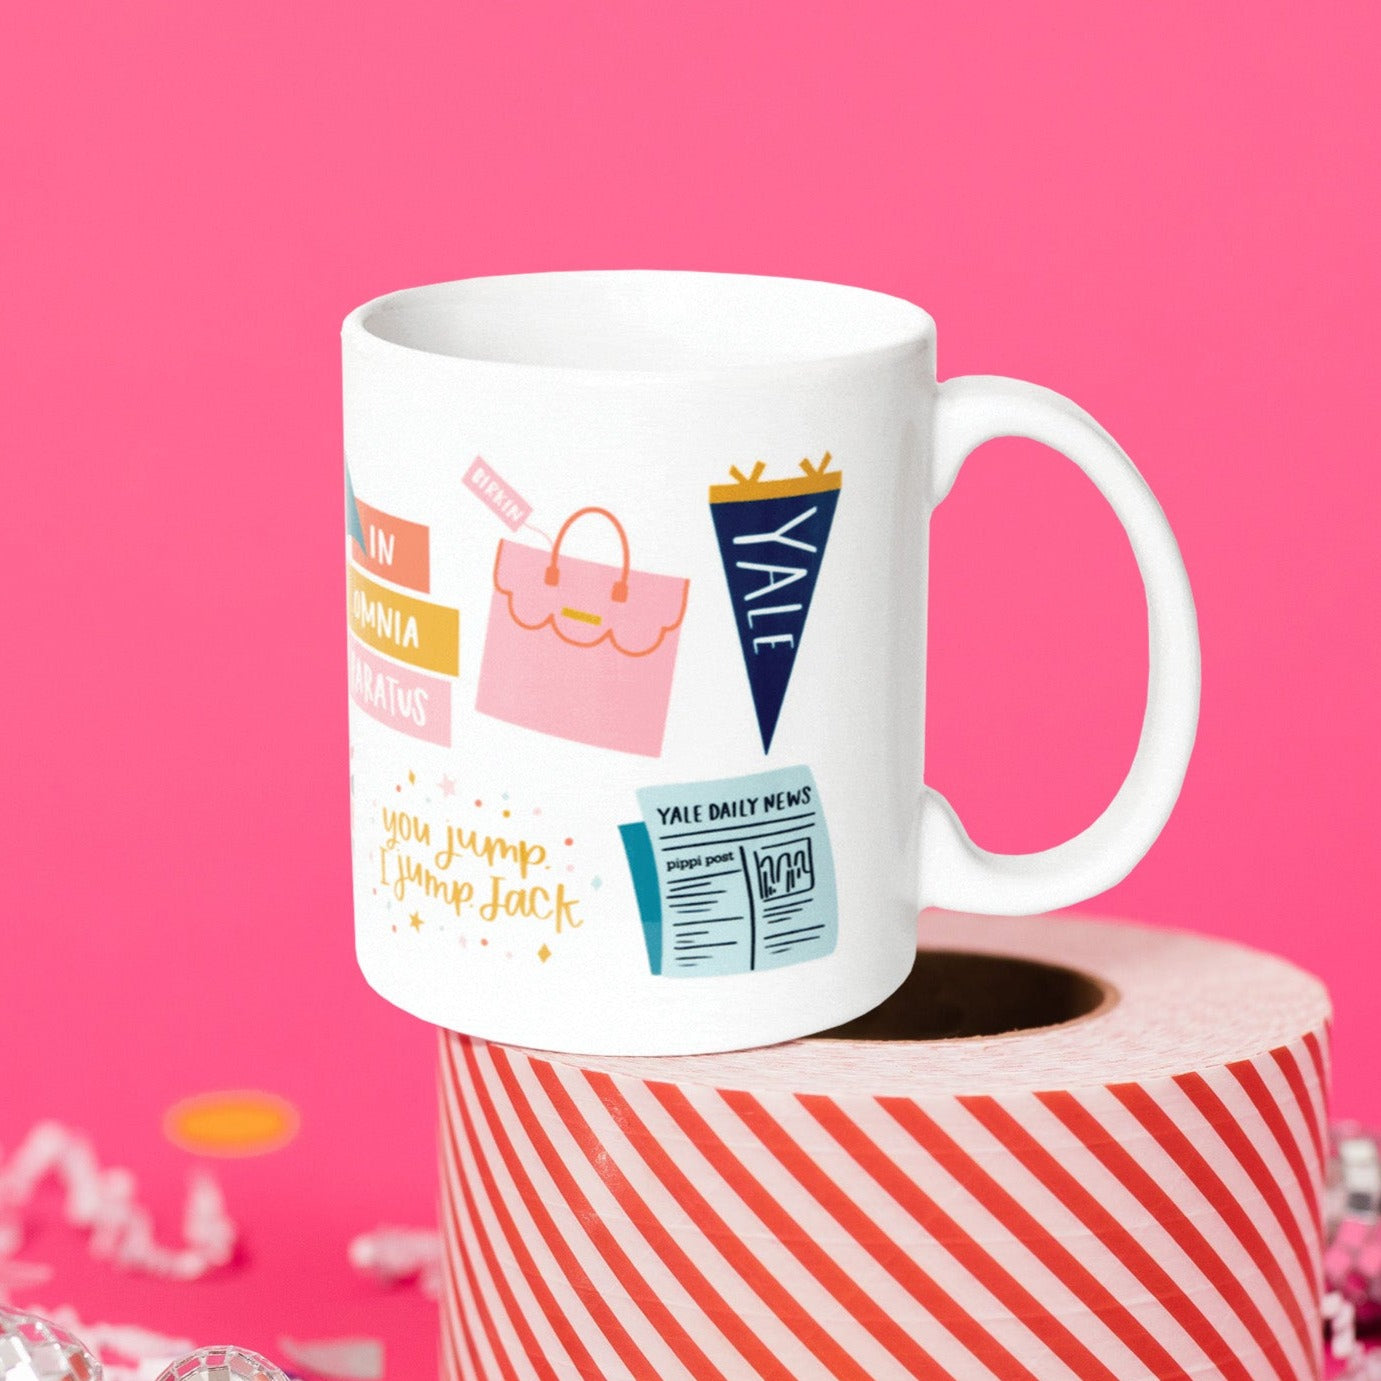 On a hot pink background sits a mug atop a red and white striped roll of packing tape with white crinkle and big, colorful confetti scattered around. There are mini disco balls. This Gilmore Girls inspired white mug says colorful illustrations from the show. There is a Birkin pink purse, a navy school banner that says “YALE”, a "YALE DAILY NEW" newspaper, and colorful stars and dots. It says "you jump I jump jack.”